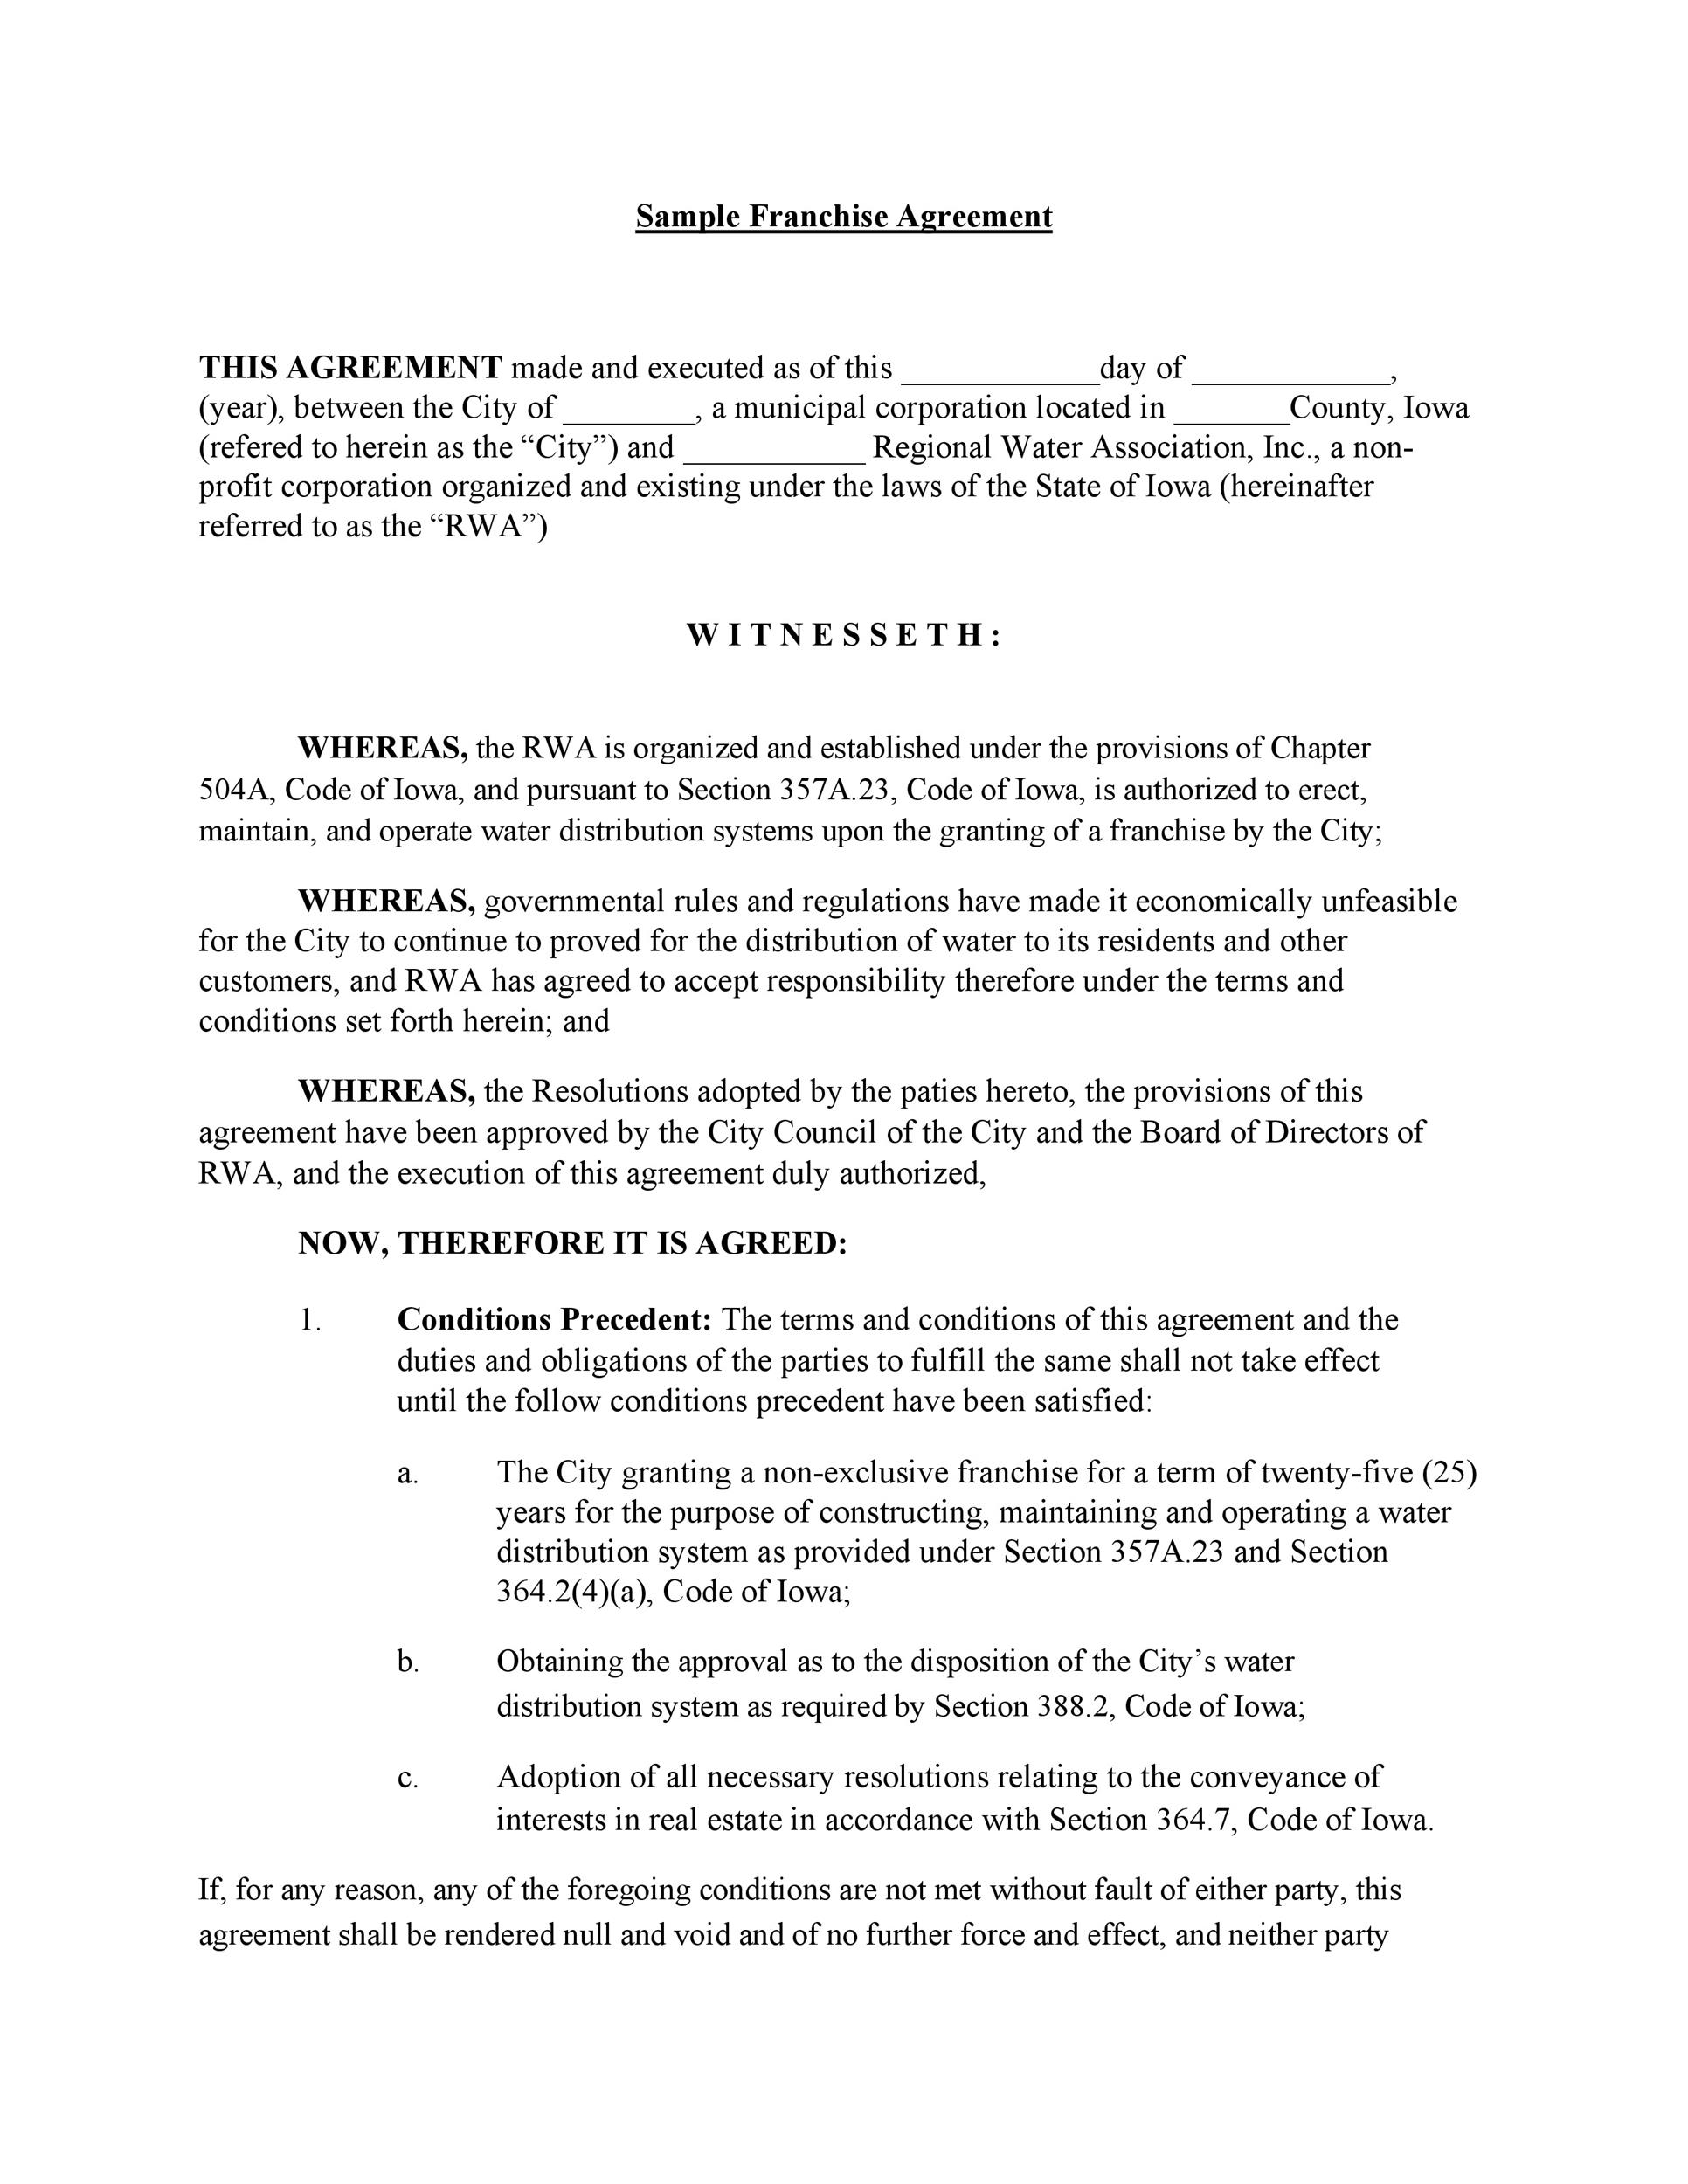 49 Editable Franchise Agreement Templates & Contracts ᐅ ...